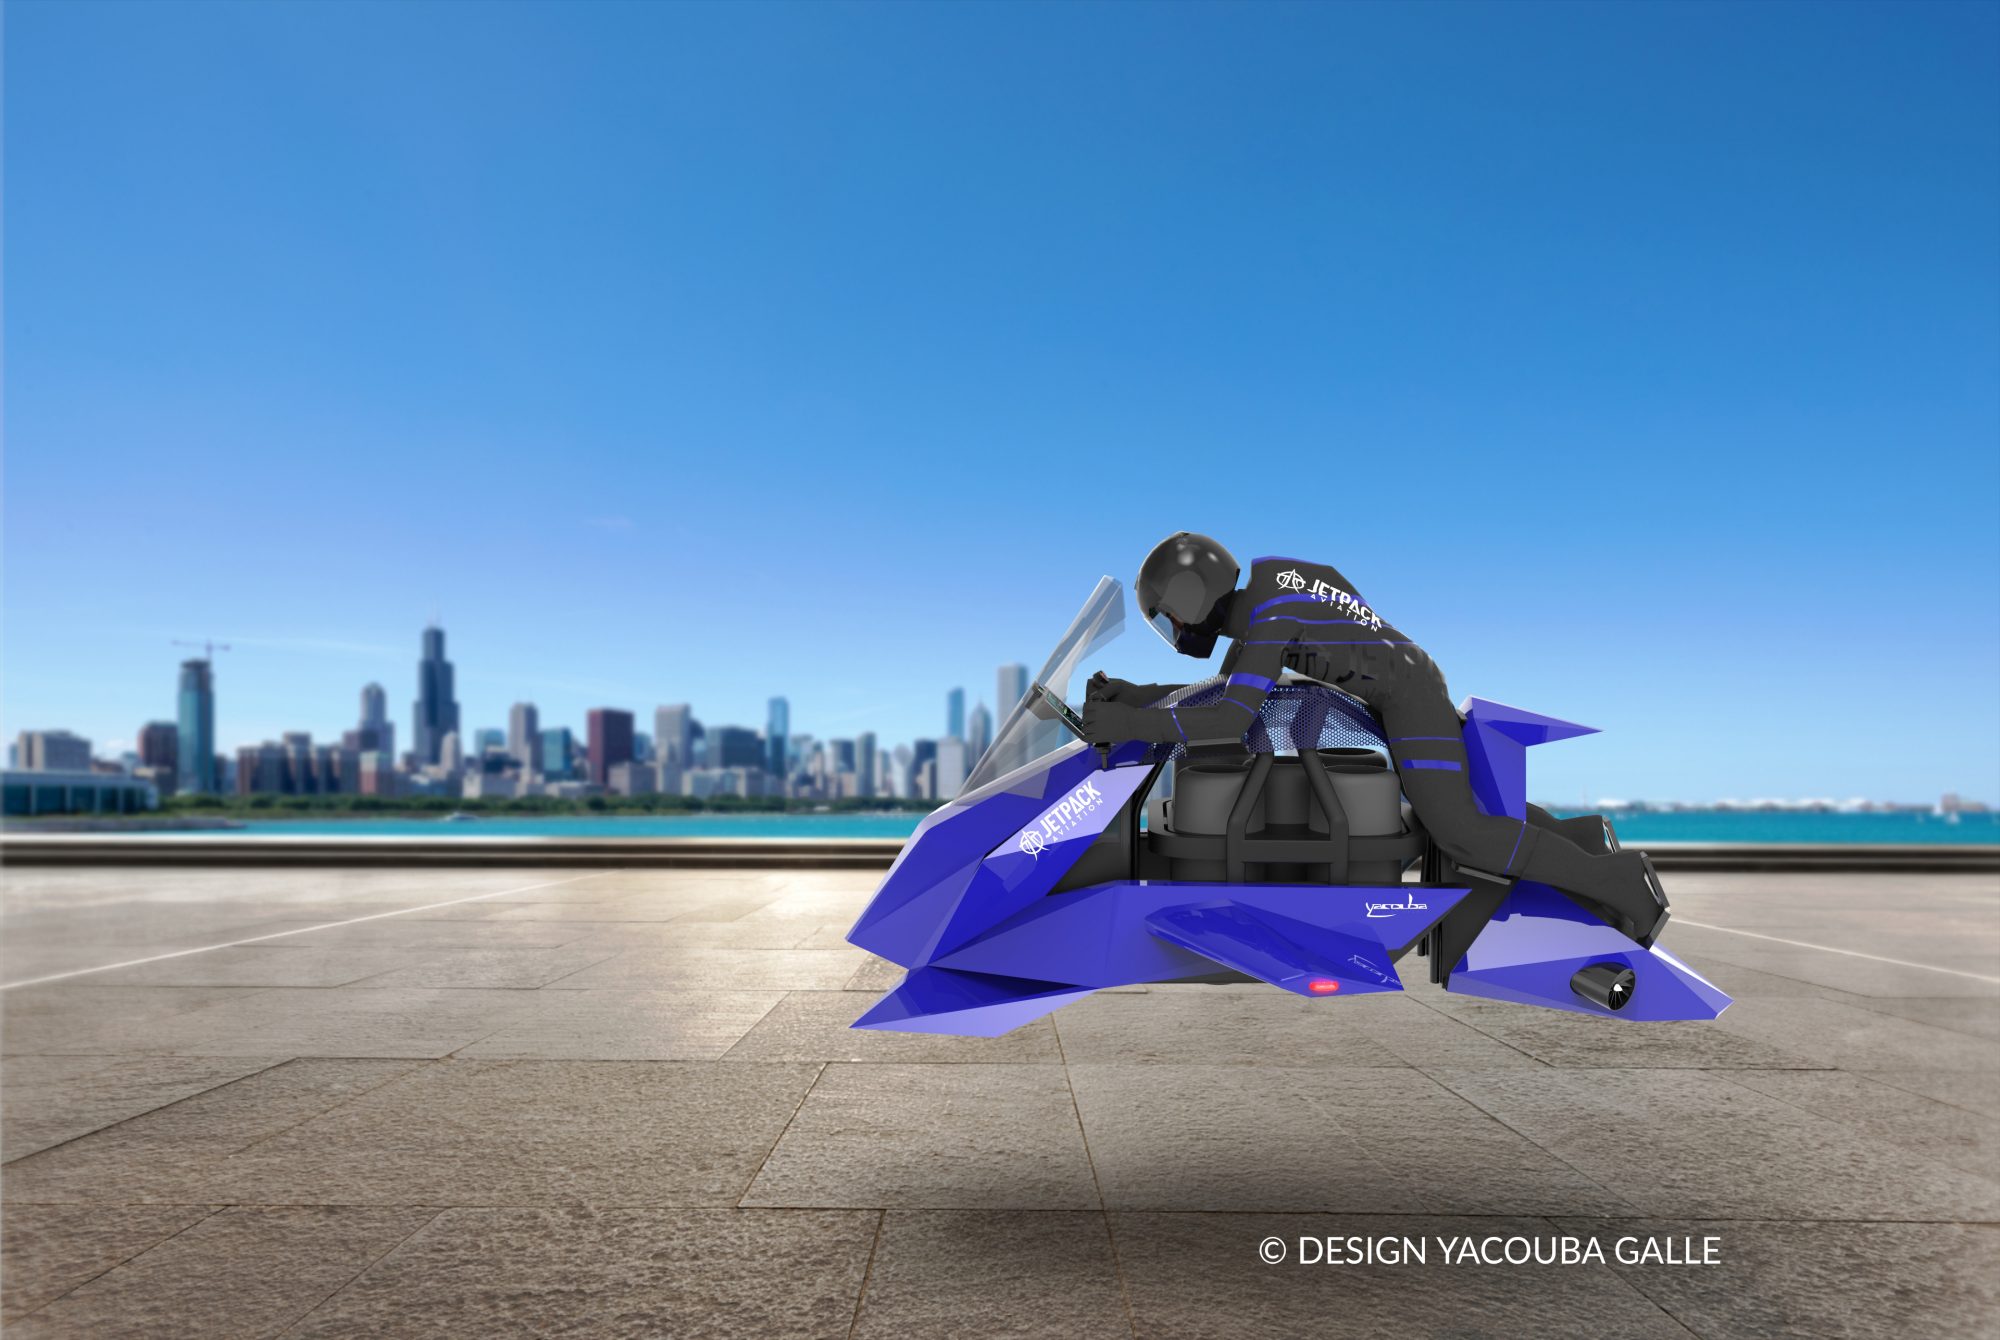 The Speeder – The world’s first flying motorcycle available for sale by 2023